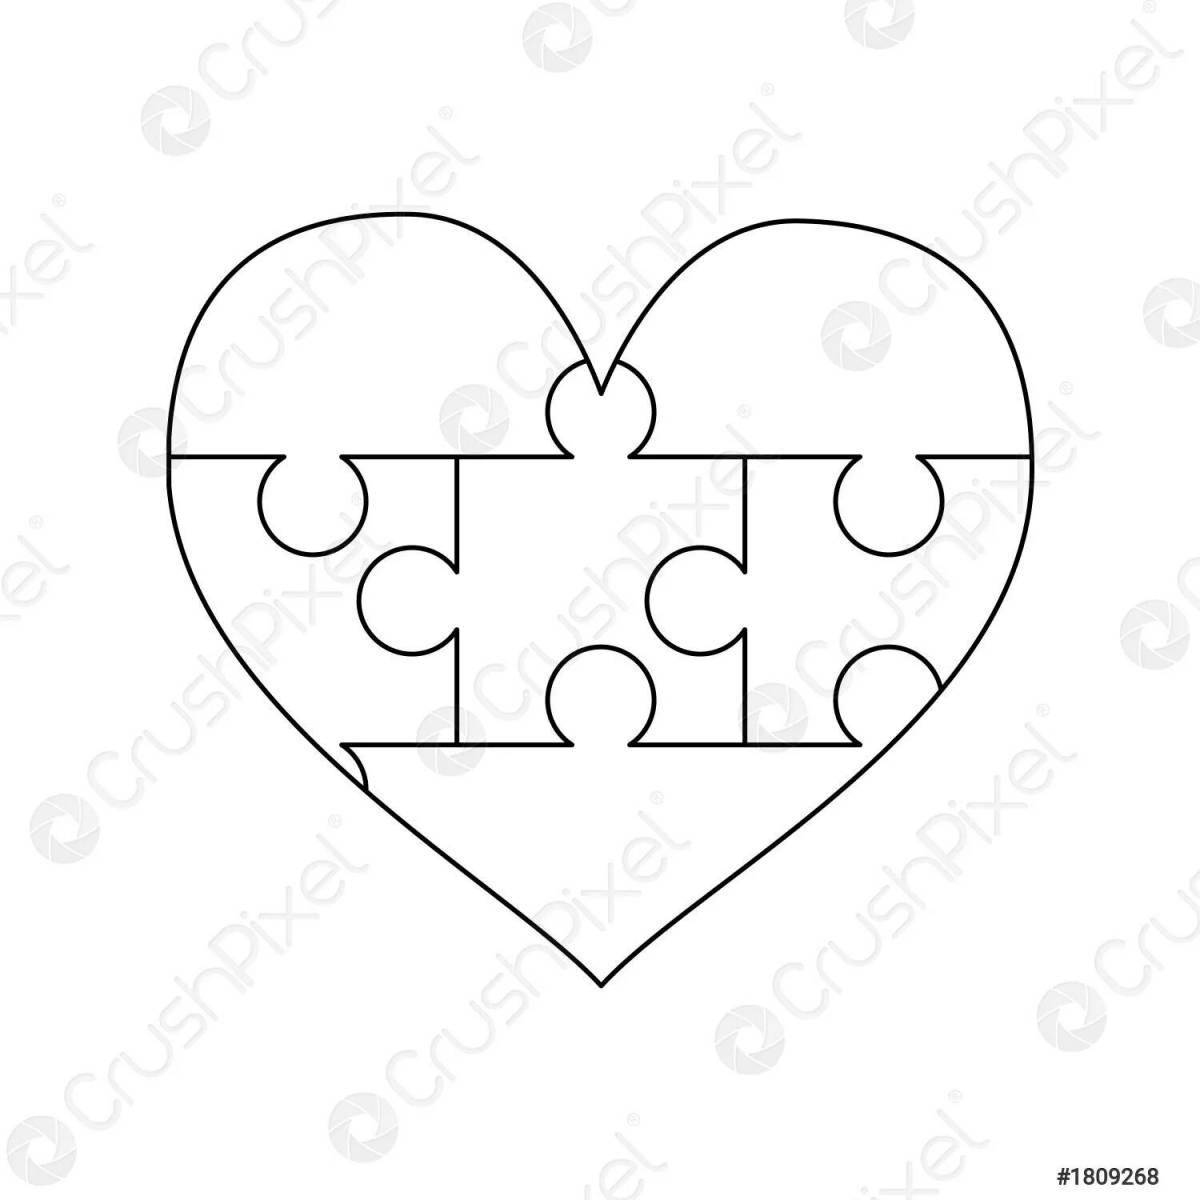 Coloring funny heart puzzle